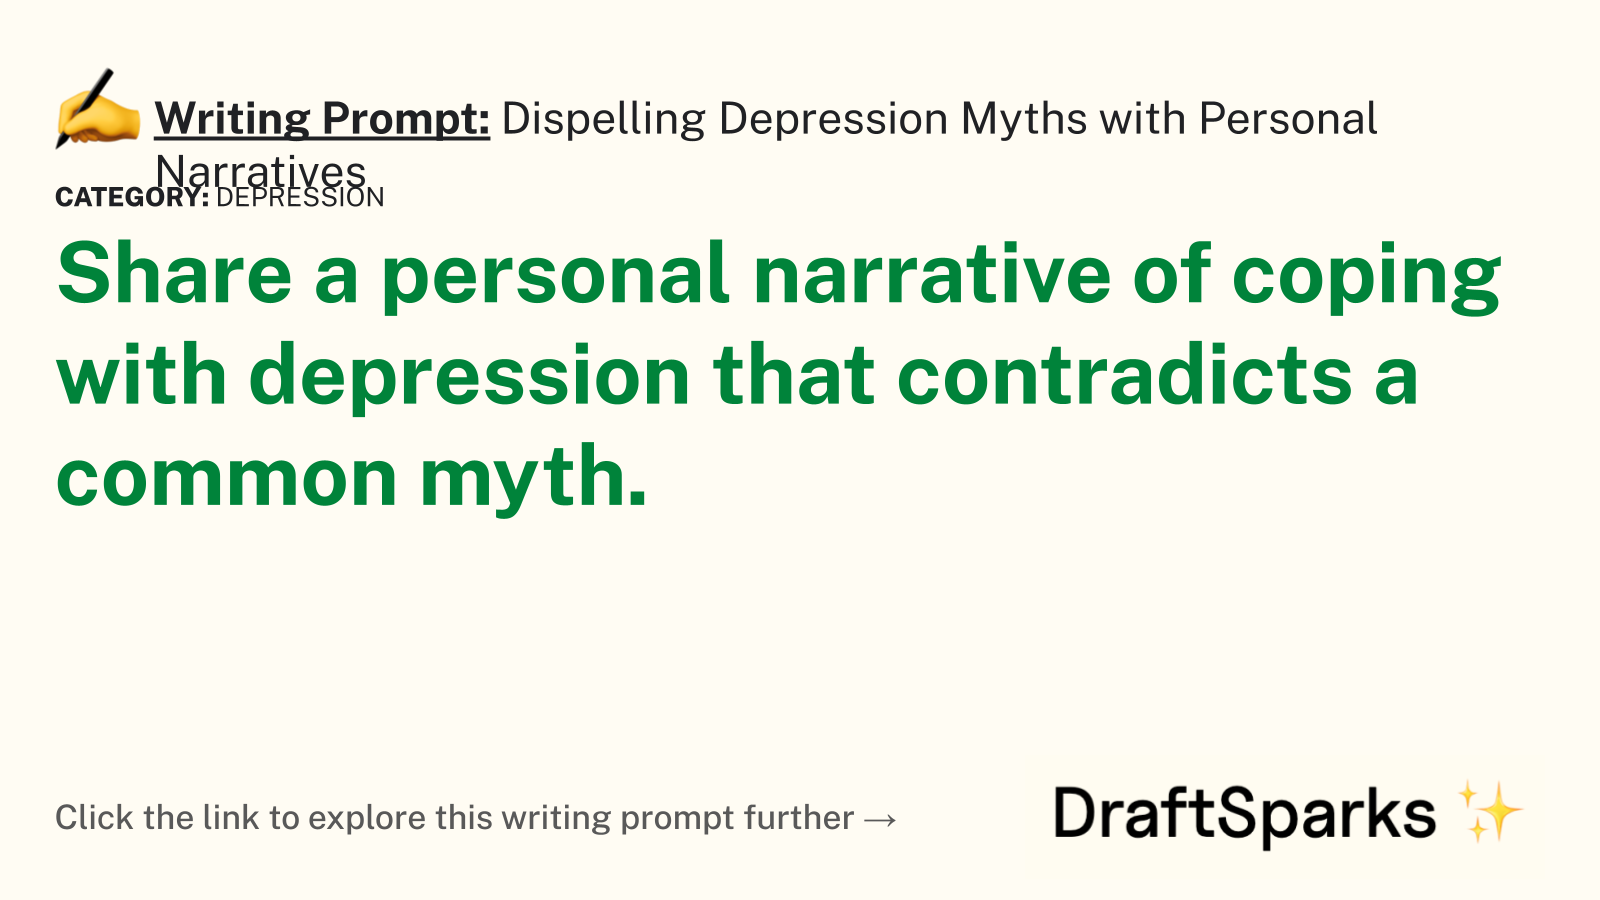 Dispelling Depression Myths with Personal Narratives